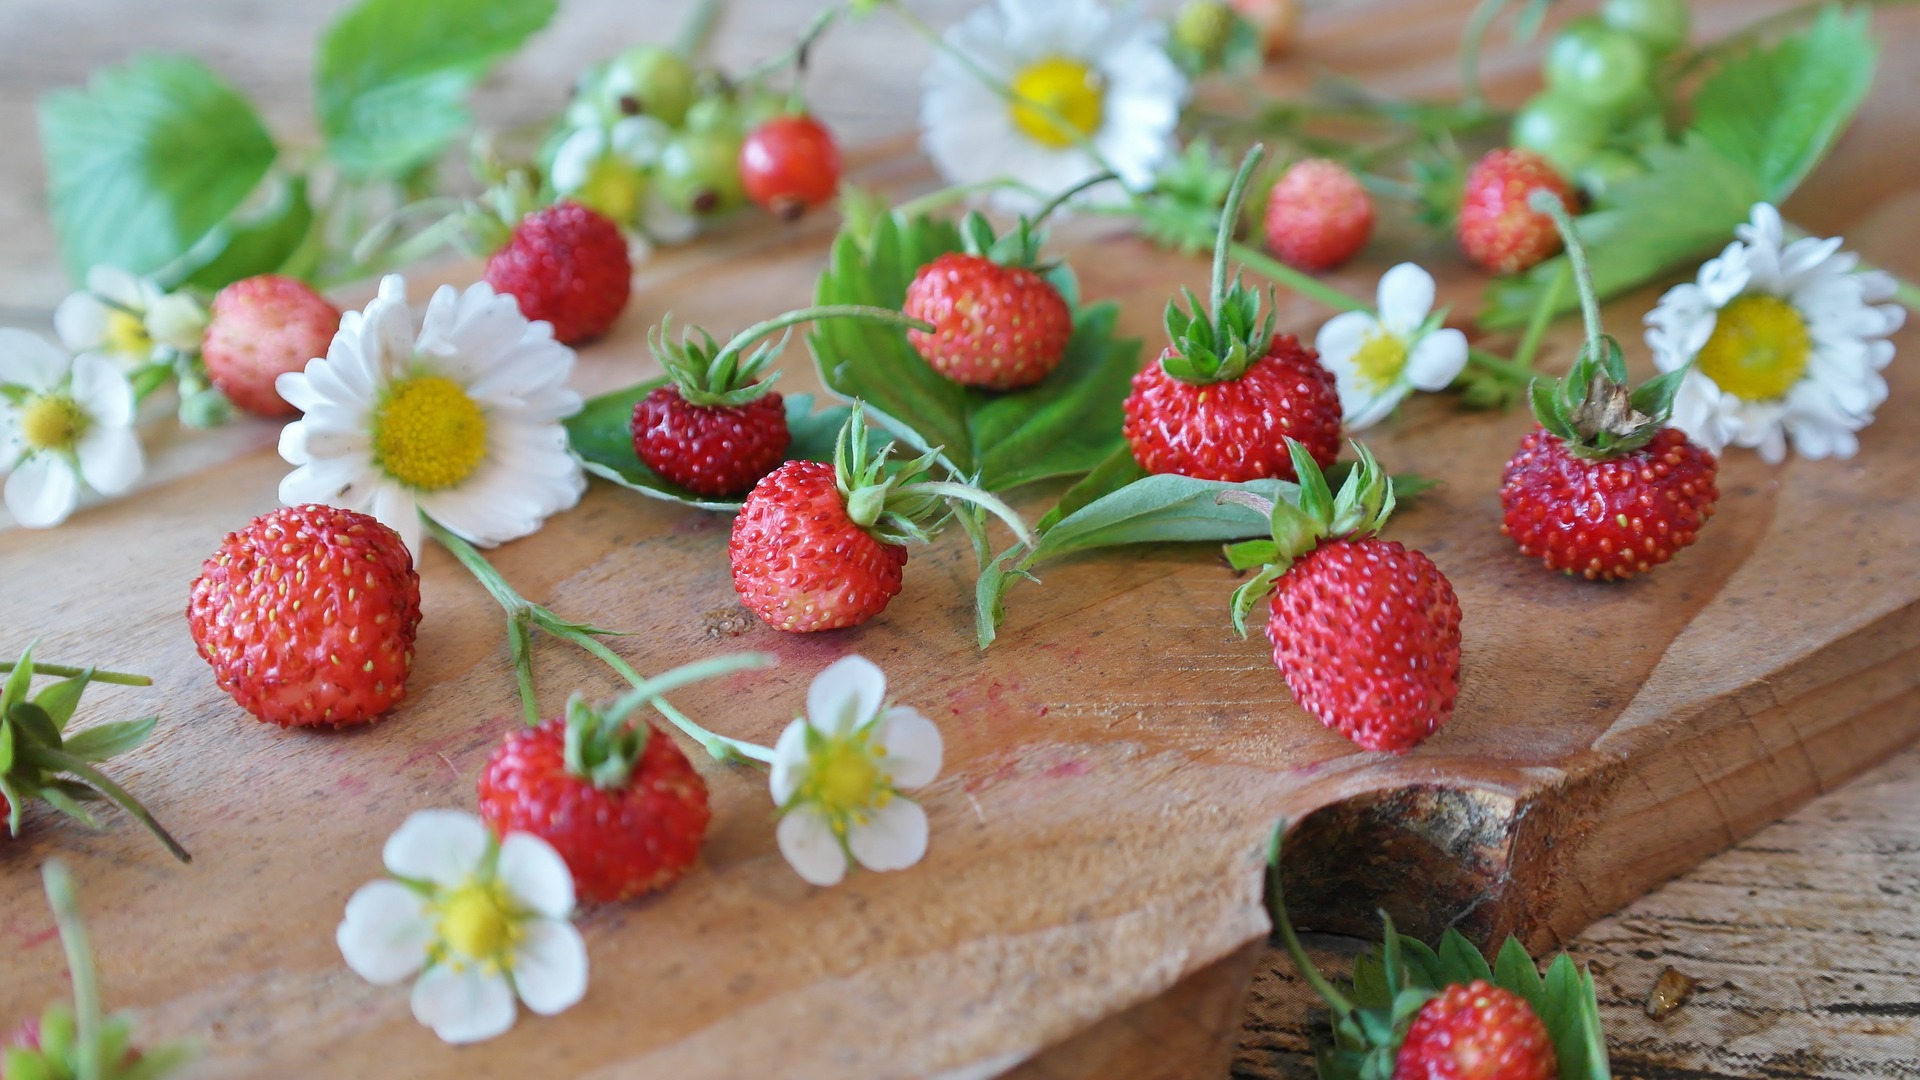 Strawberries are a favorite summer fruit. Yet store-bought berries can’t come near the intense and fresh flavor of those picked right off the vine from your very own garden.